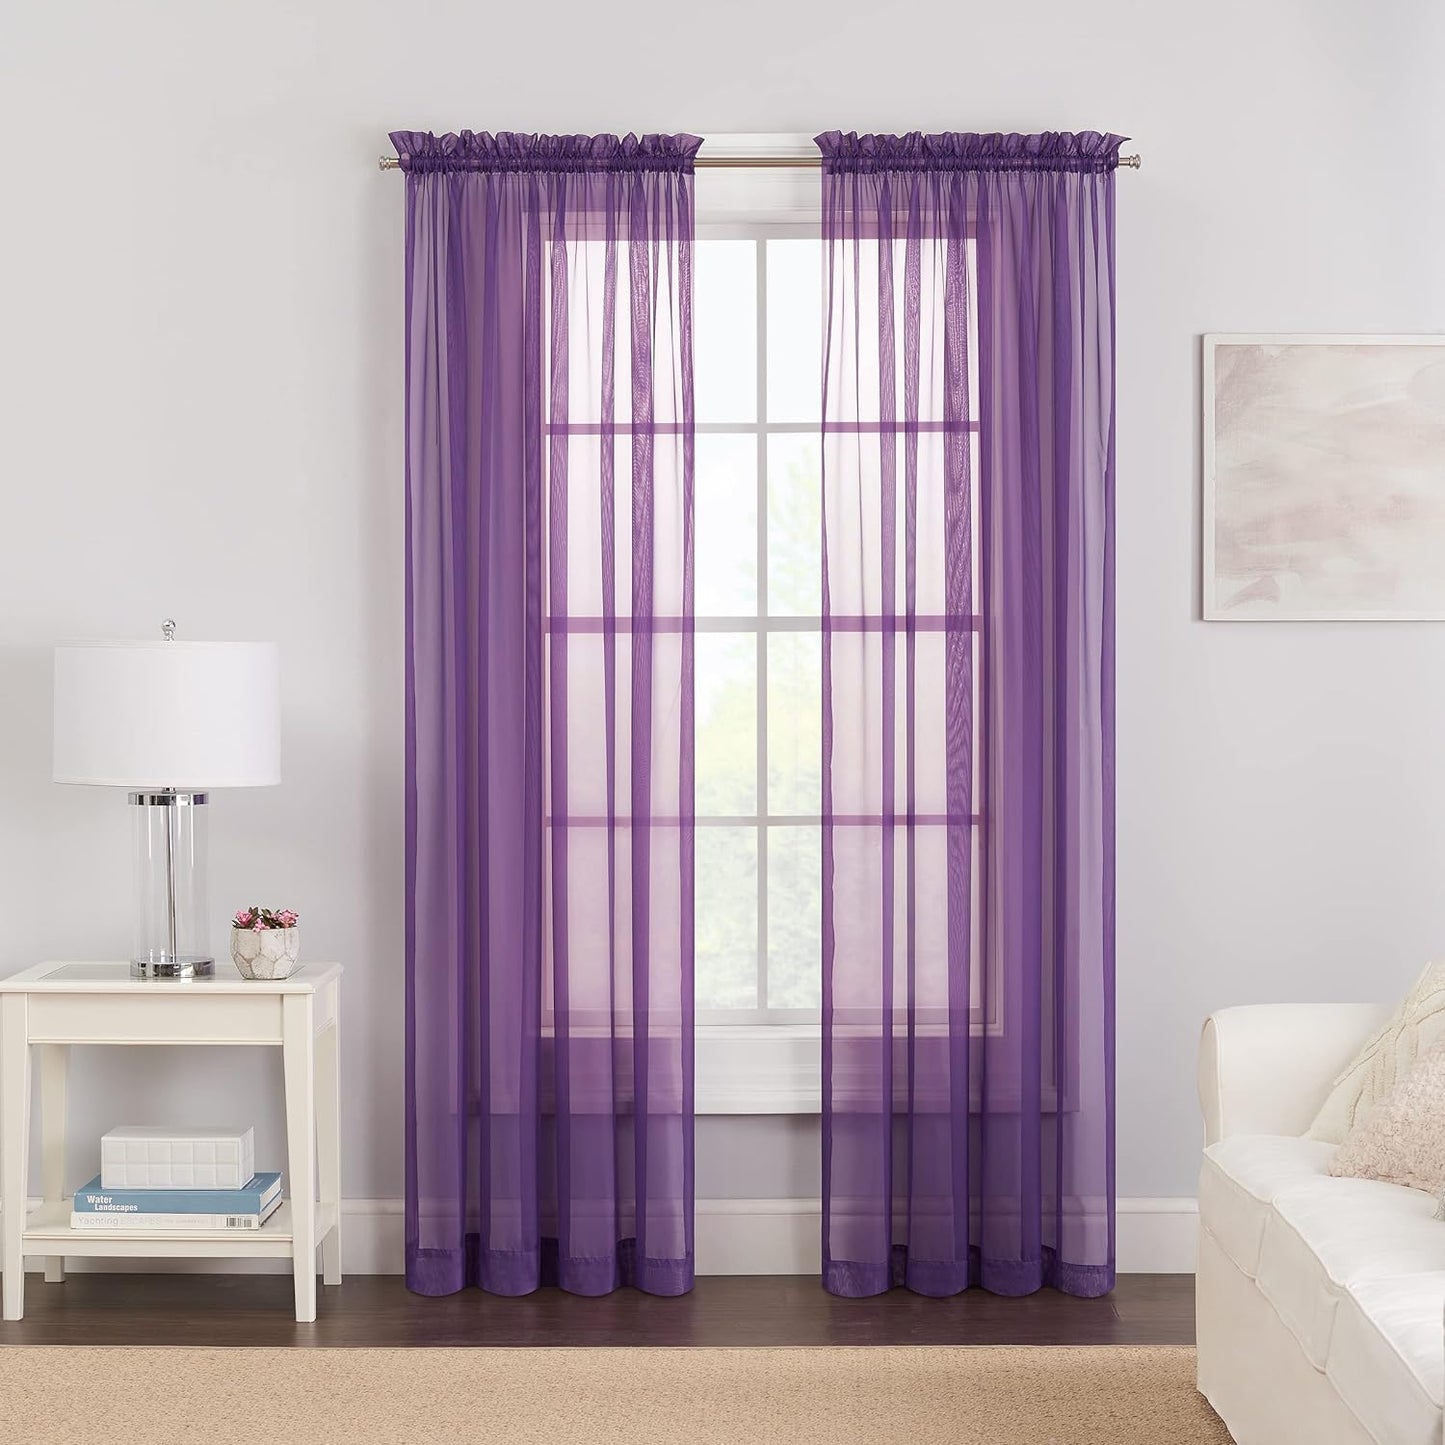 Pairs to Go Victoria Voile Modern Sheer Rod Pocket Window Curtains for Living Room (2 Panels), 59 in X 95 In, White  Ellery Homestyles Purple Curtains 59 In X 63 In